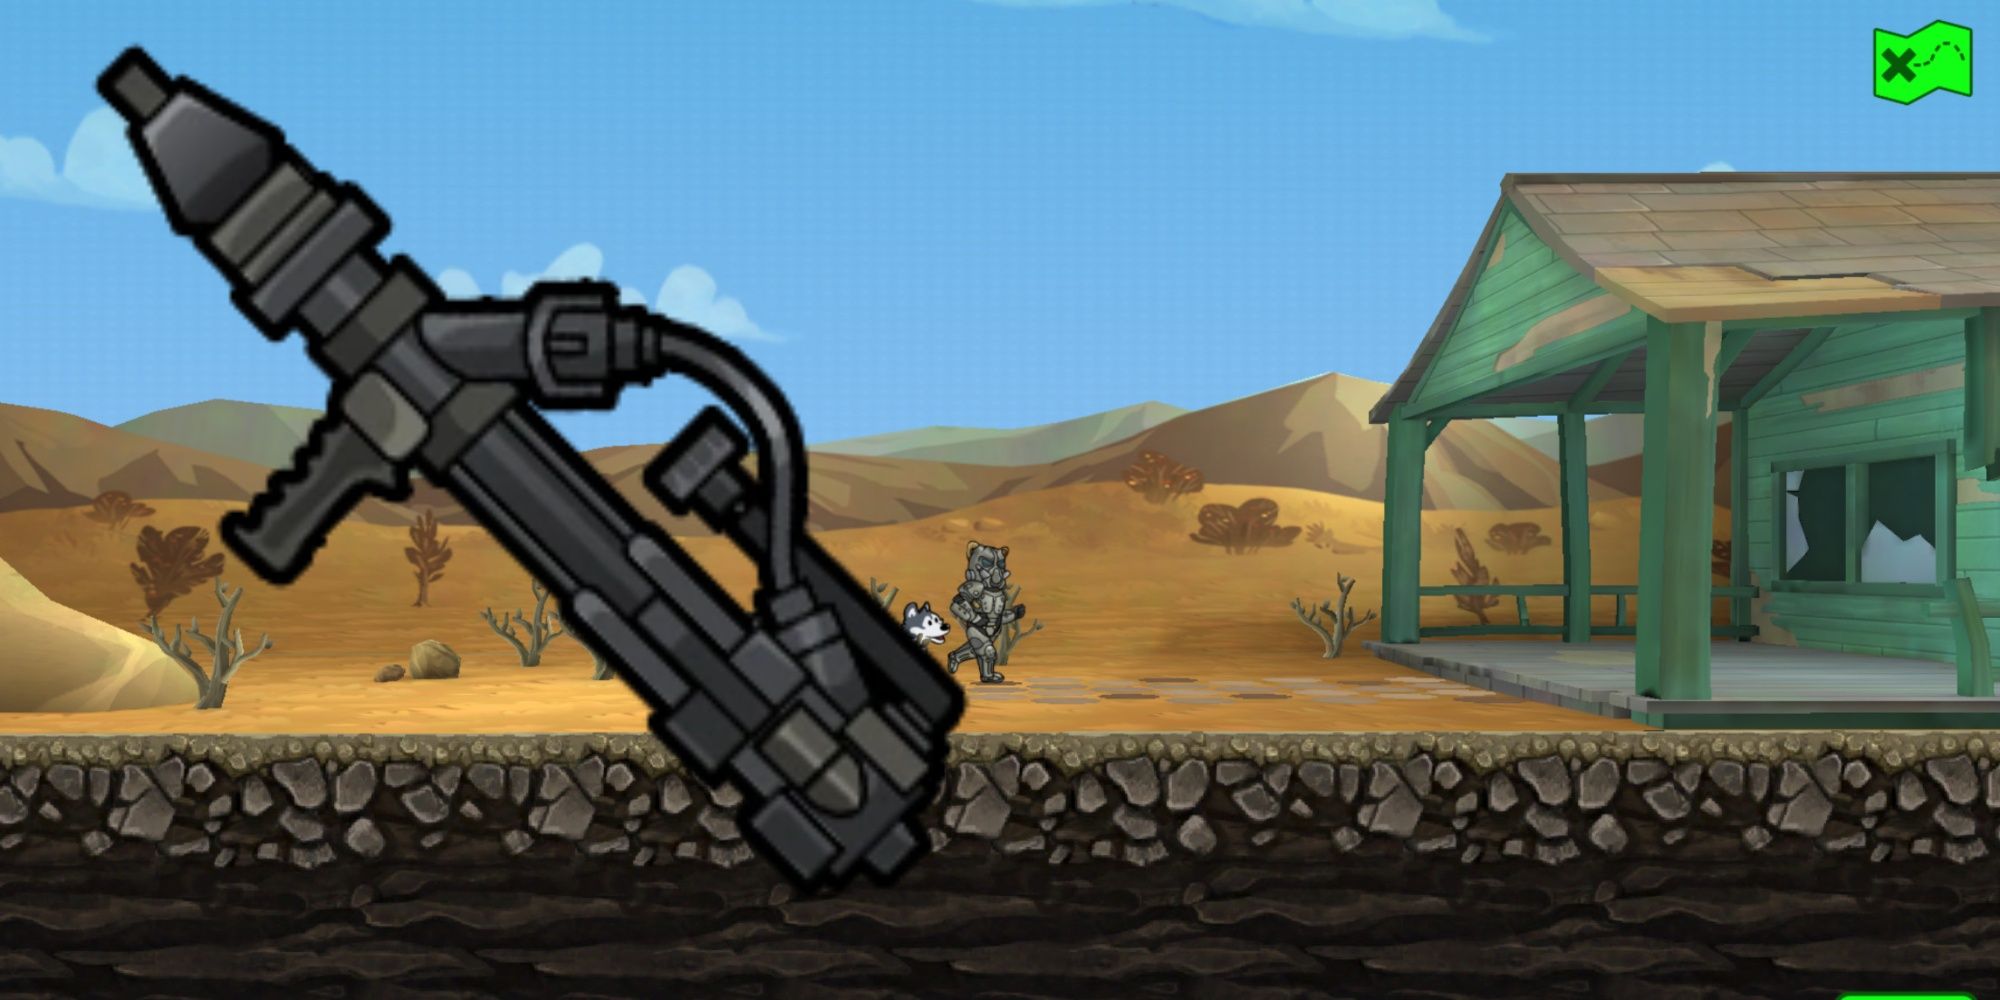 Burnmaster Weapon In Fallout Shelter